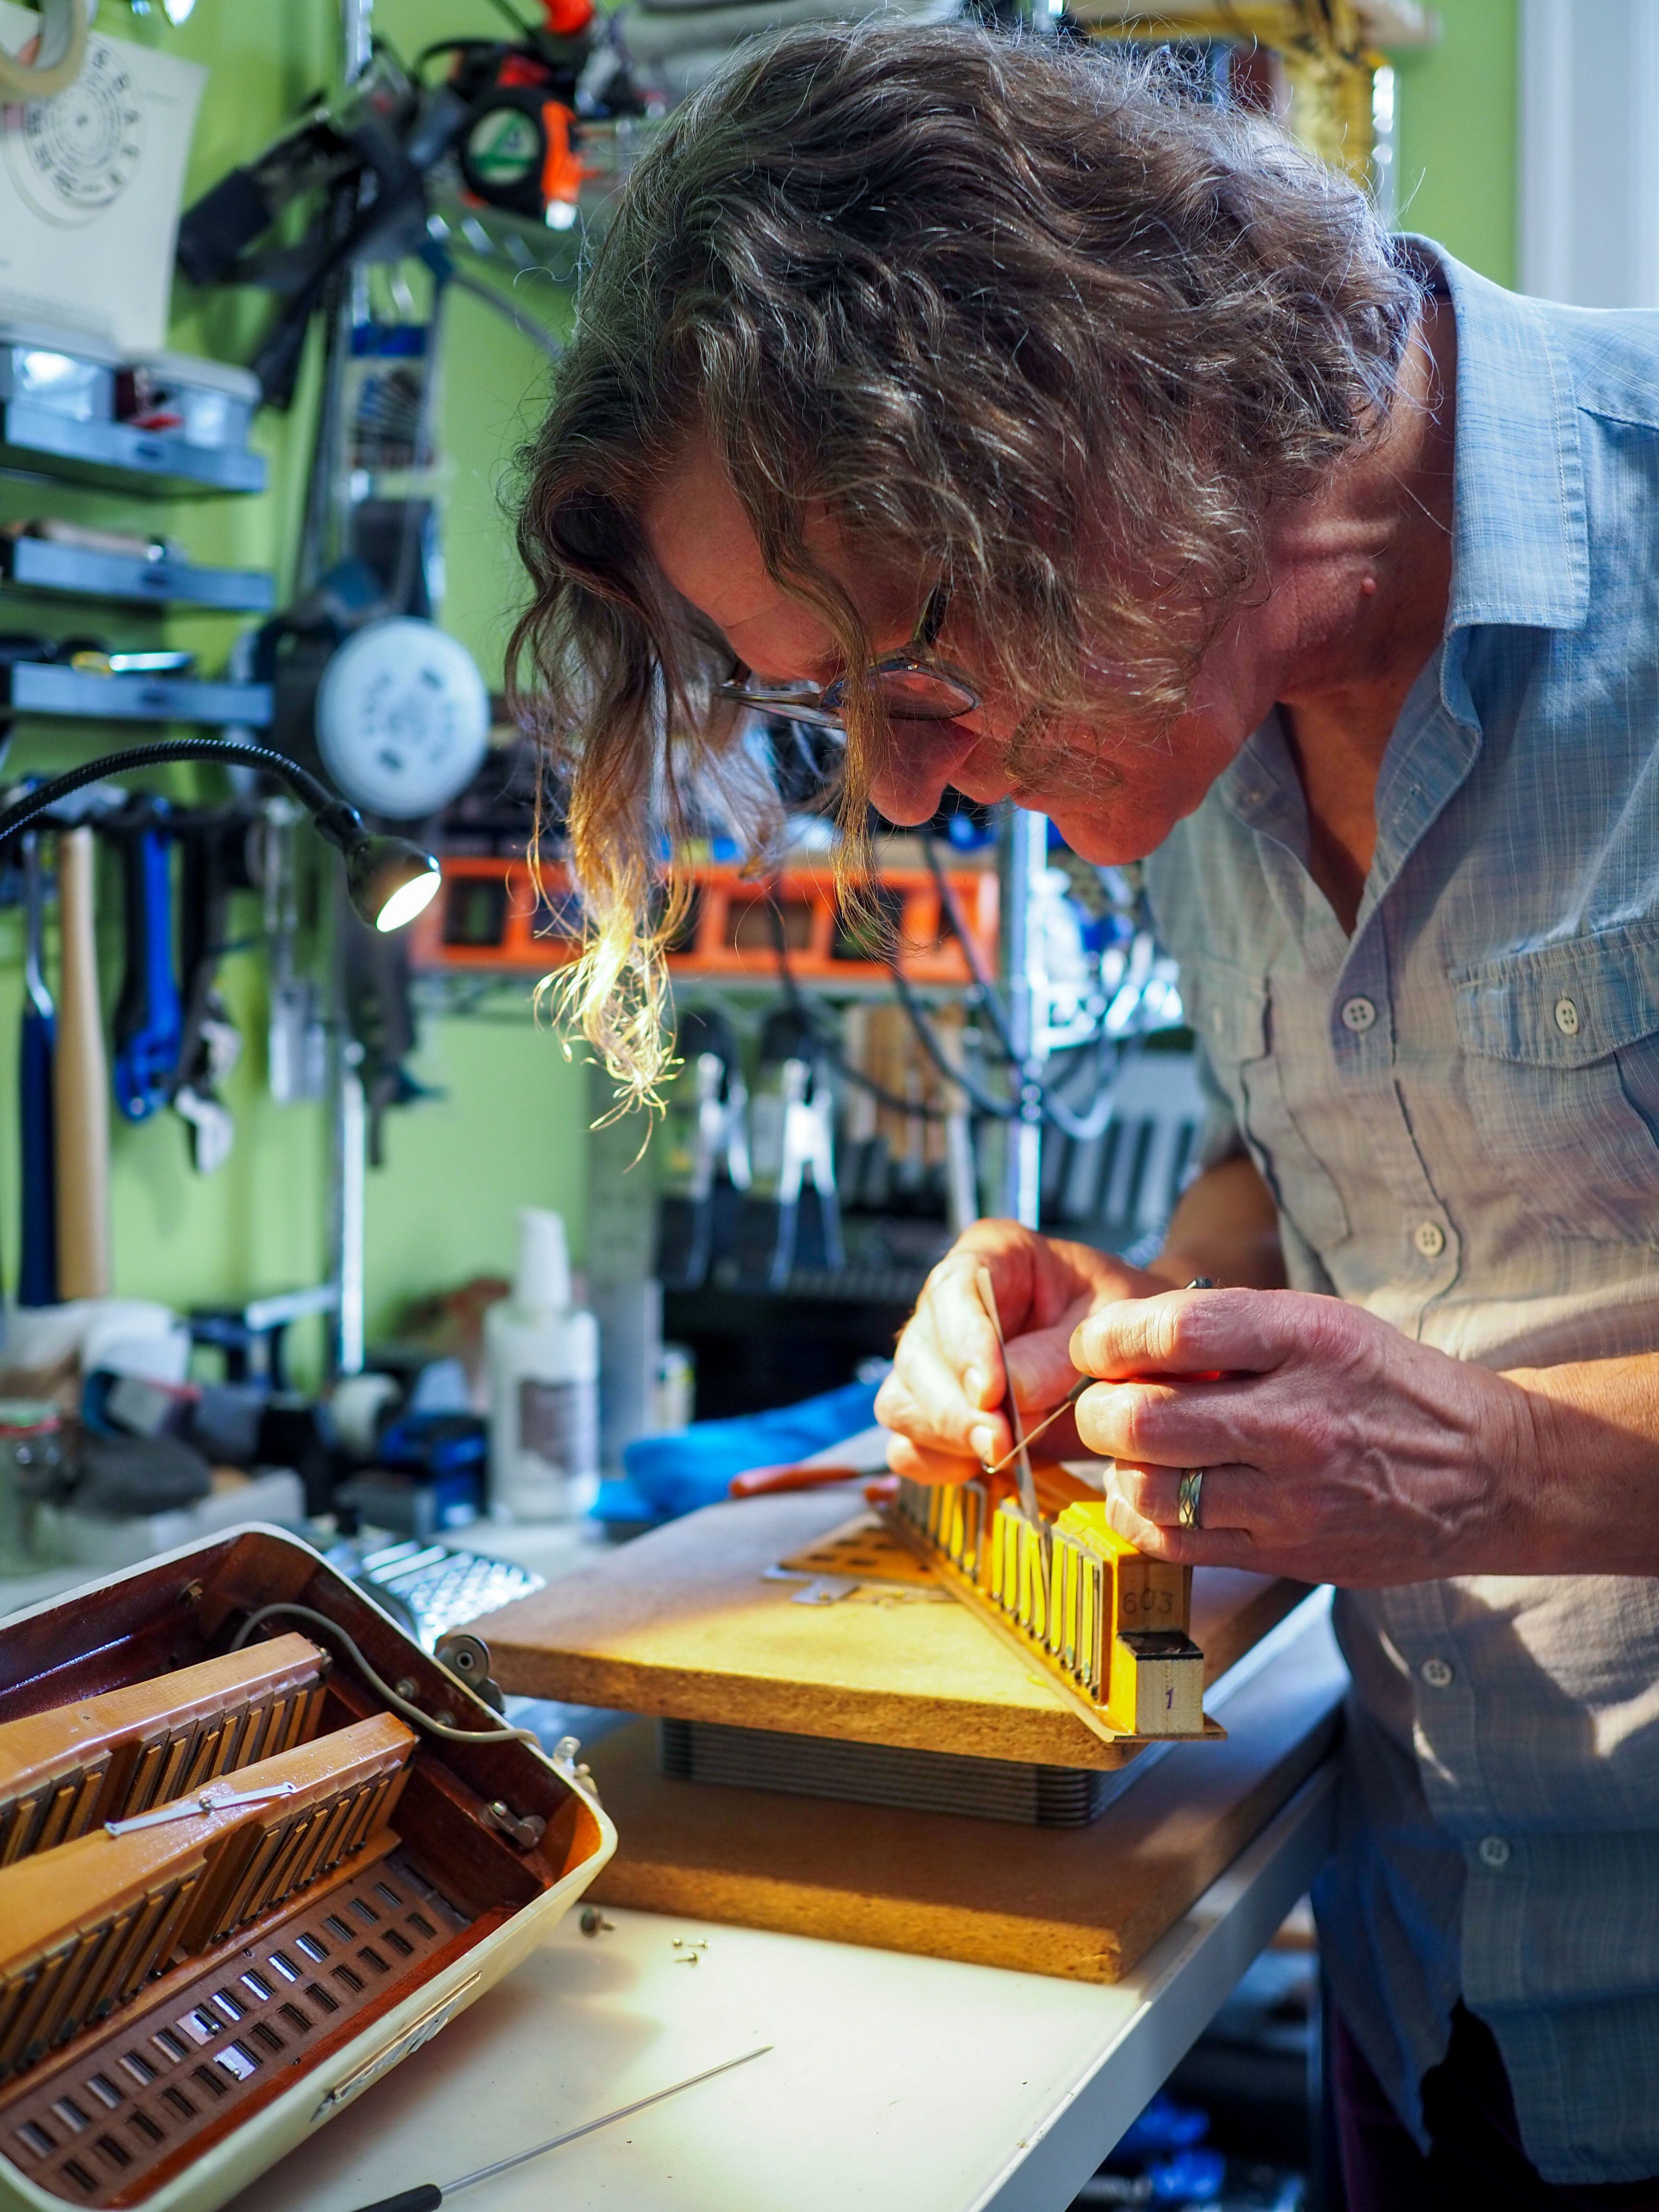 David Beer is Portland's Squeezebox Surgeon. For the past five years he has been repairing accordions and other free-reed instruments at his workshop in Southeast Portland.